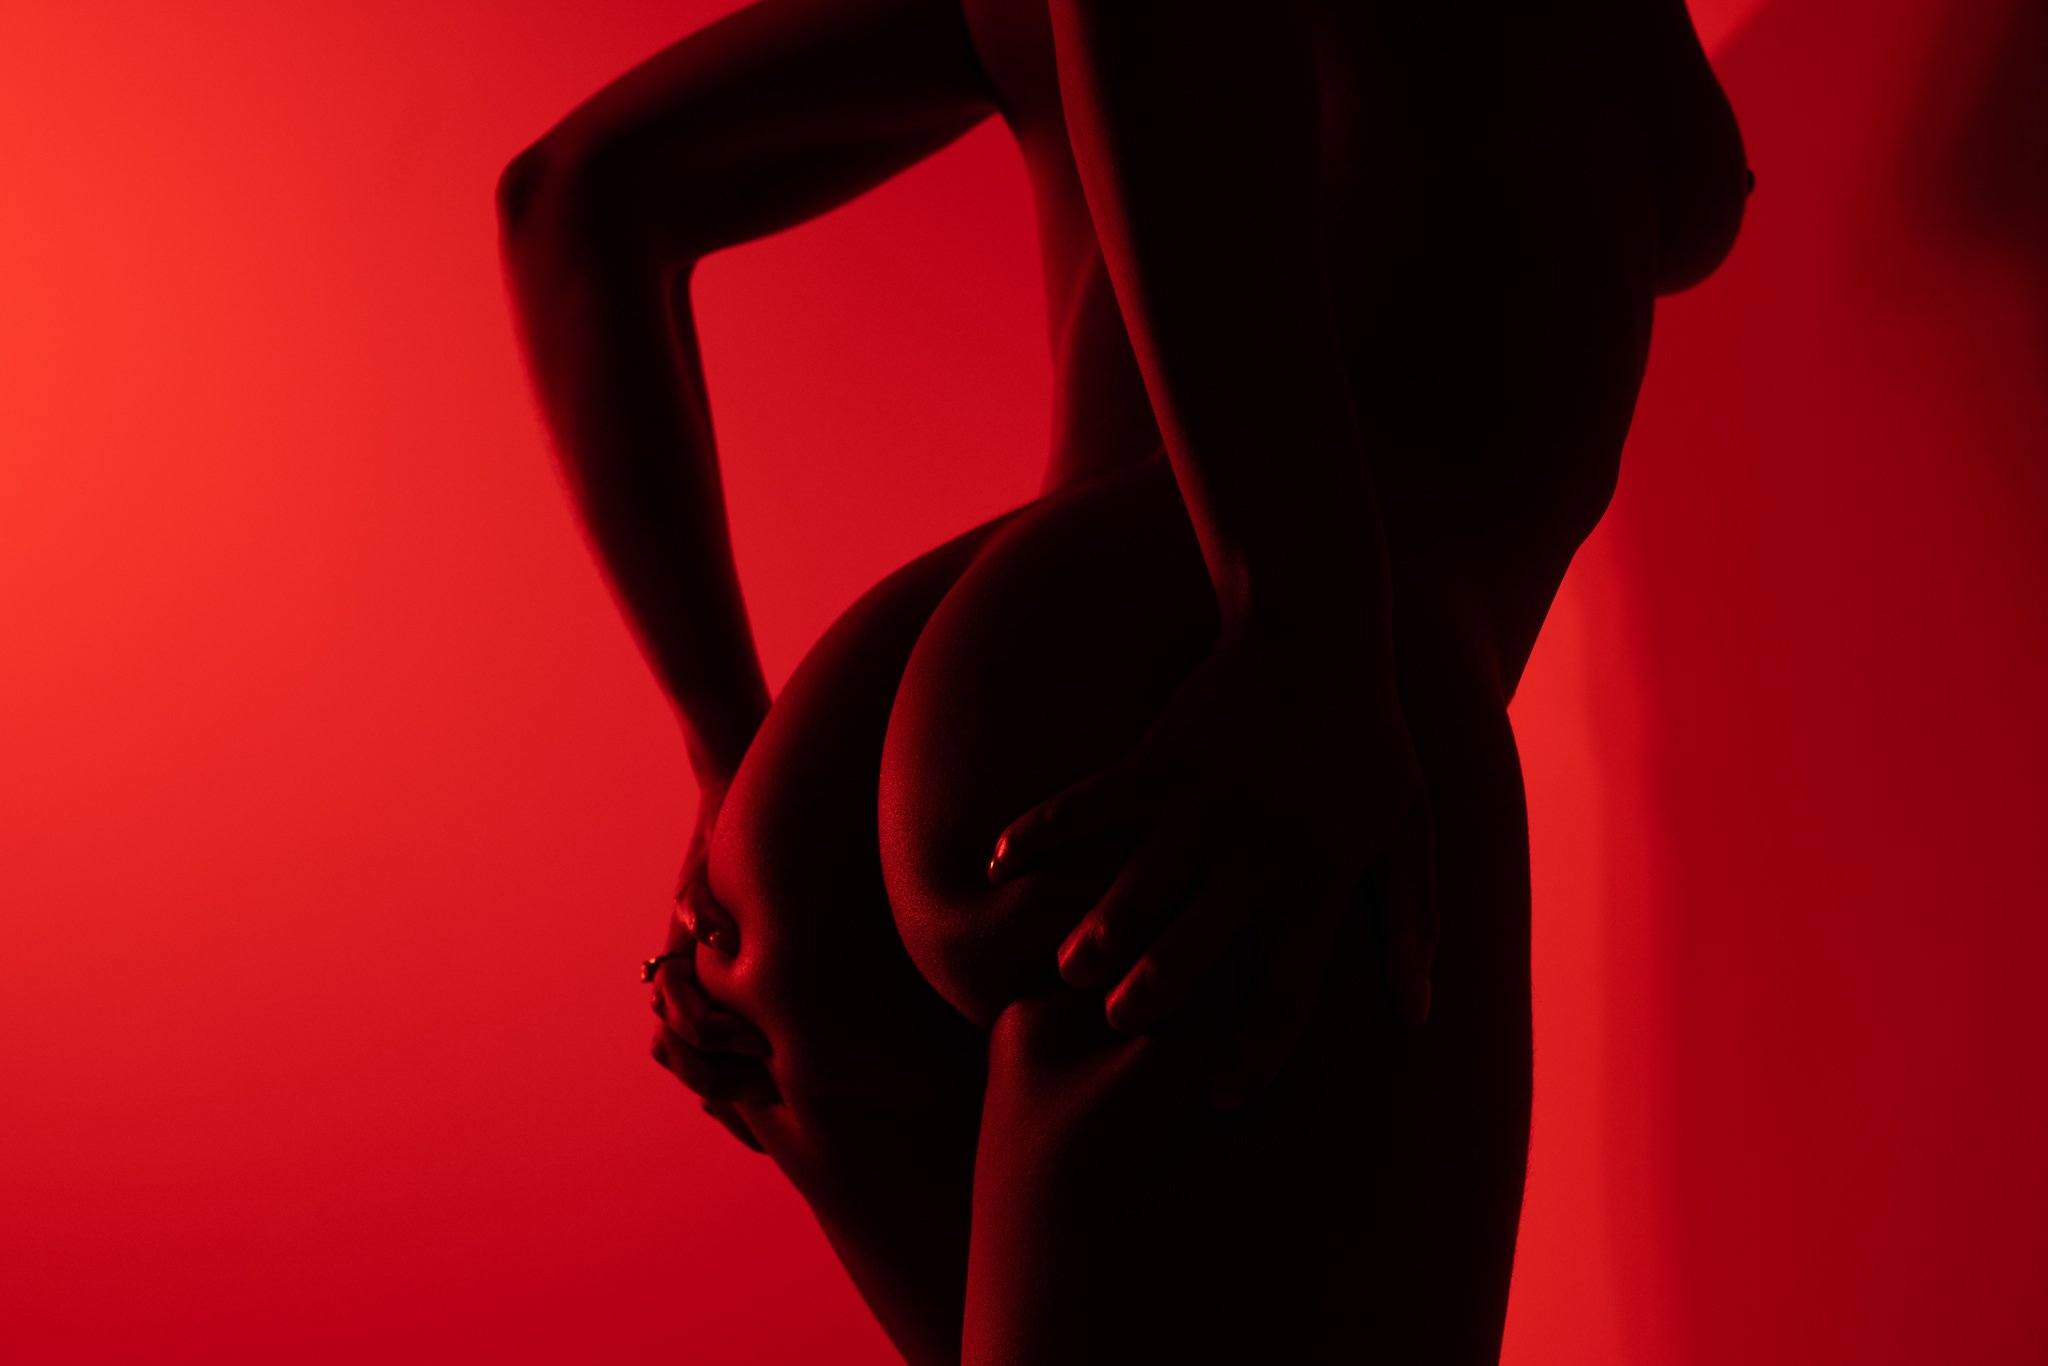 Red room booty shot boudoir photograph